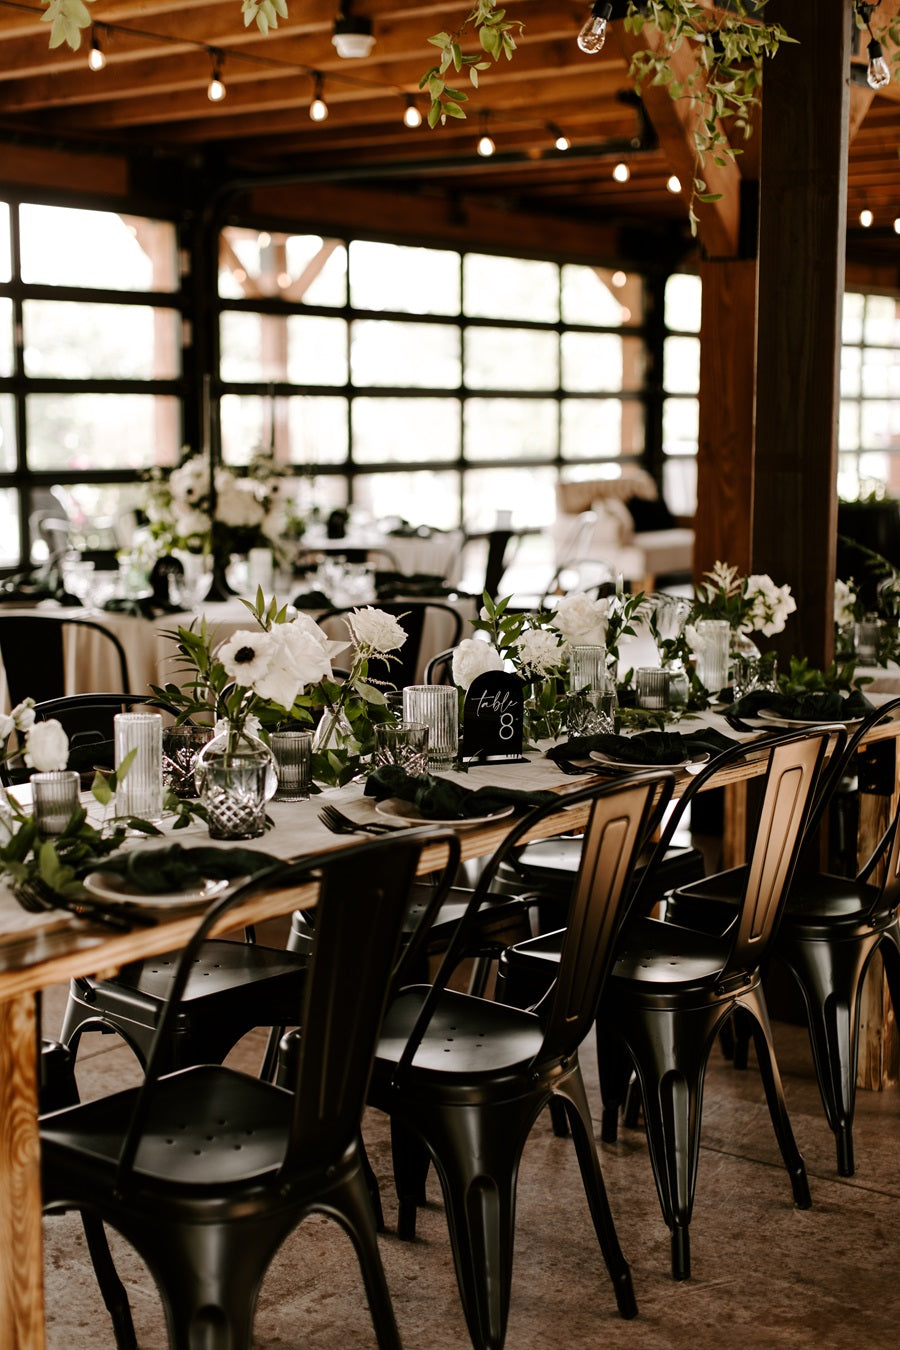 Floral arrangements lining a long table set with a palette of greens, blacks, and whites.